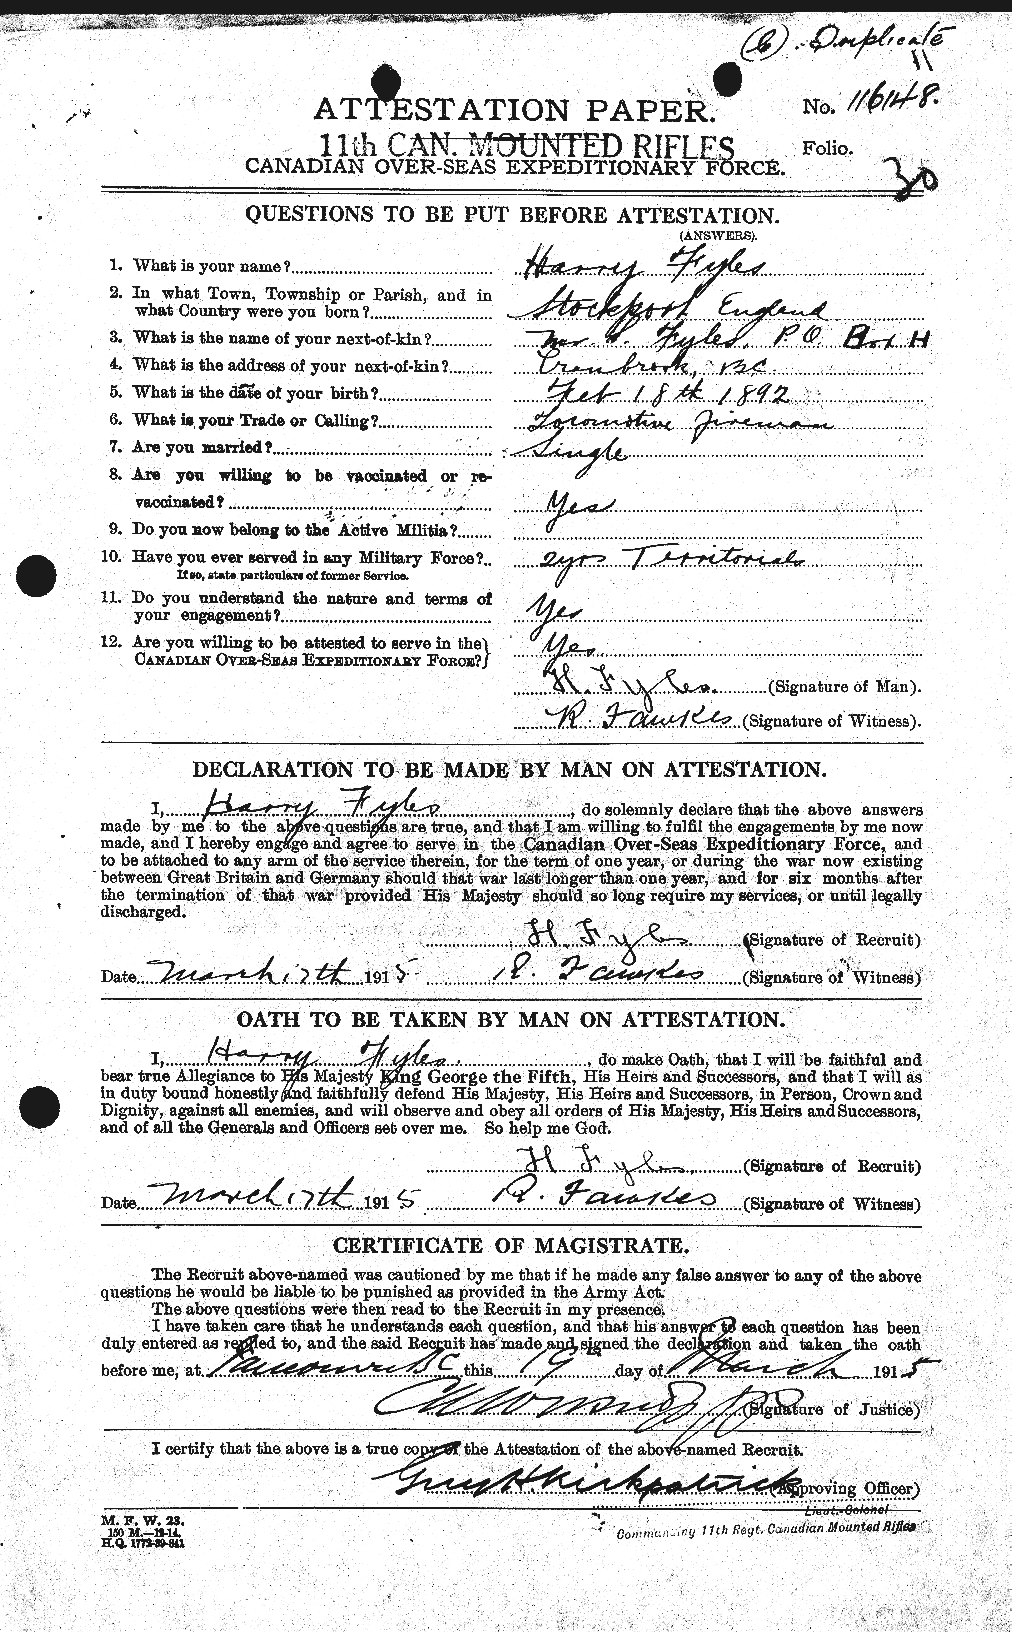 Personnel Records of the First World War - CEF 338876a